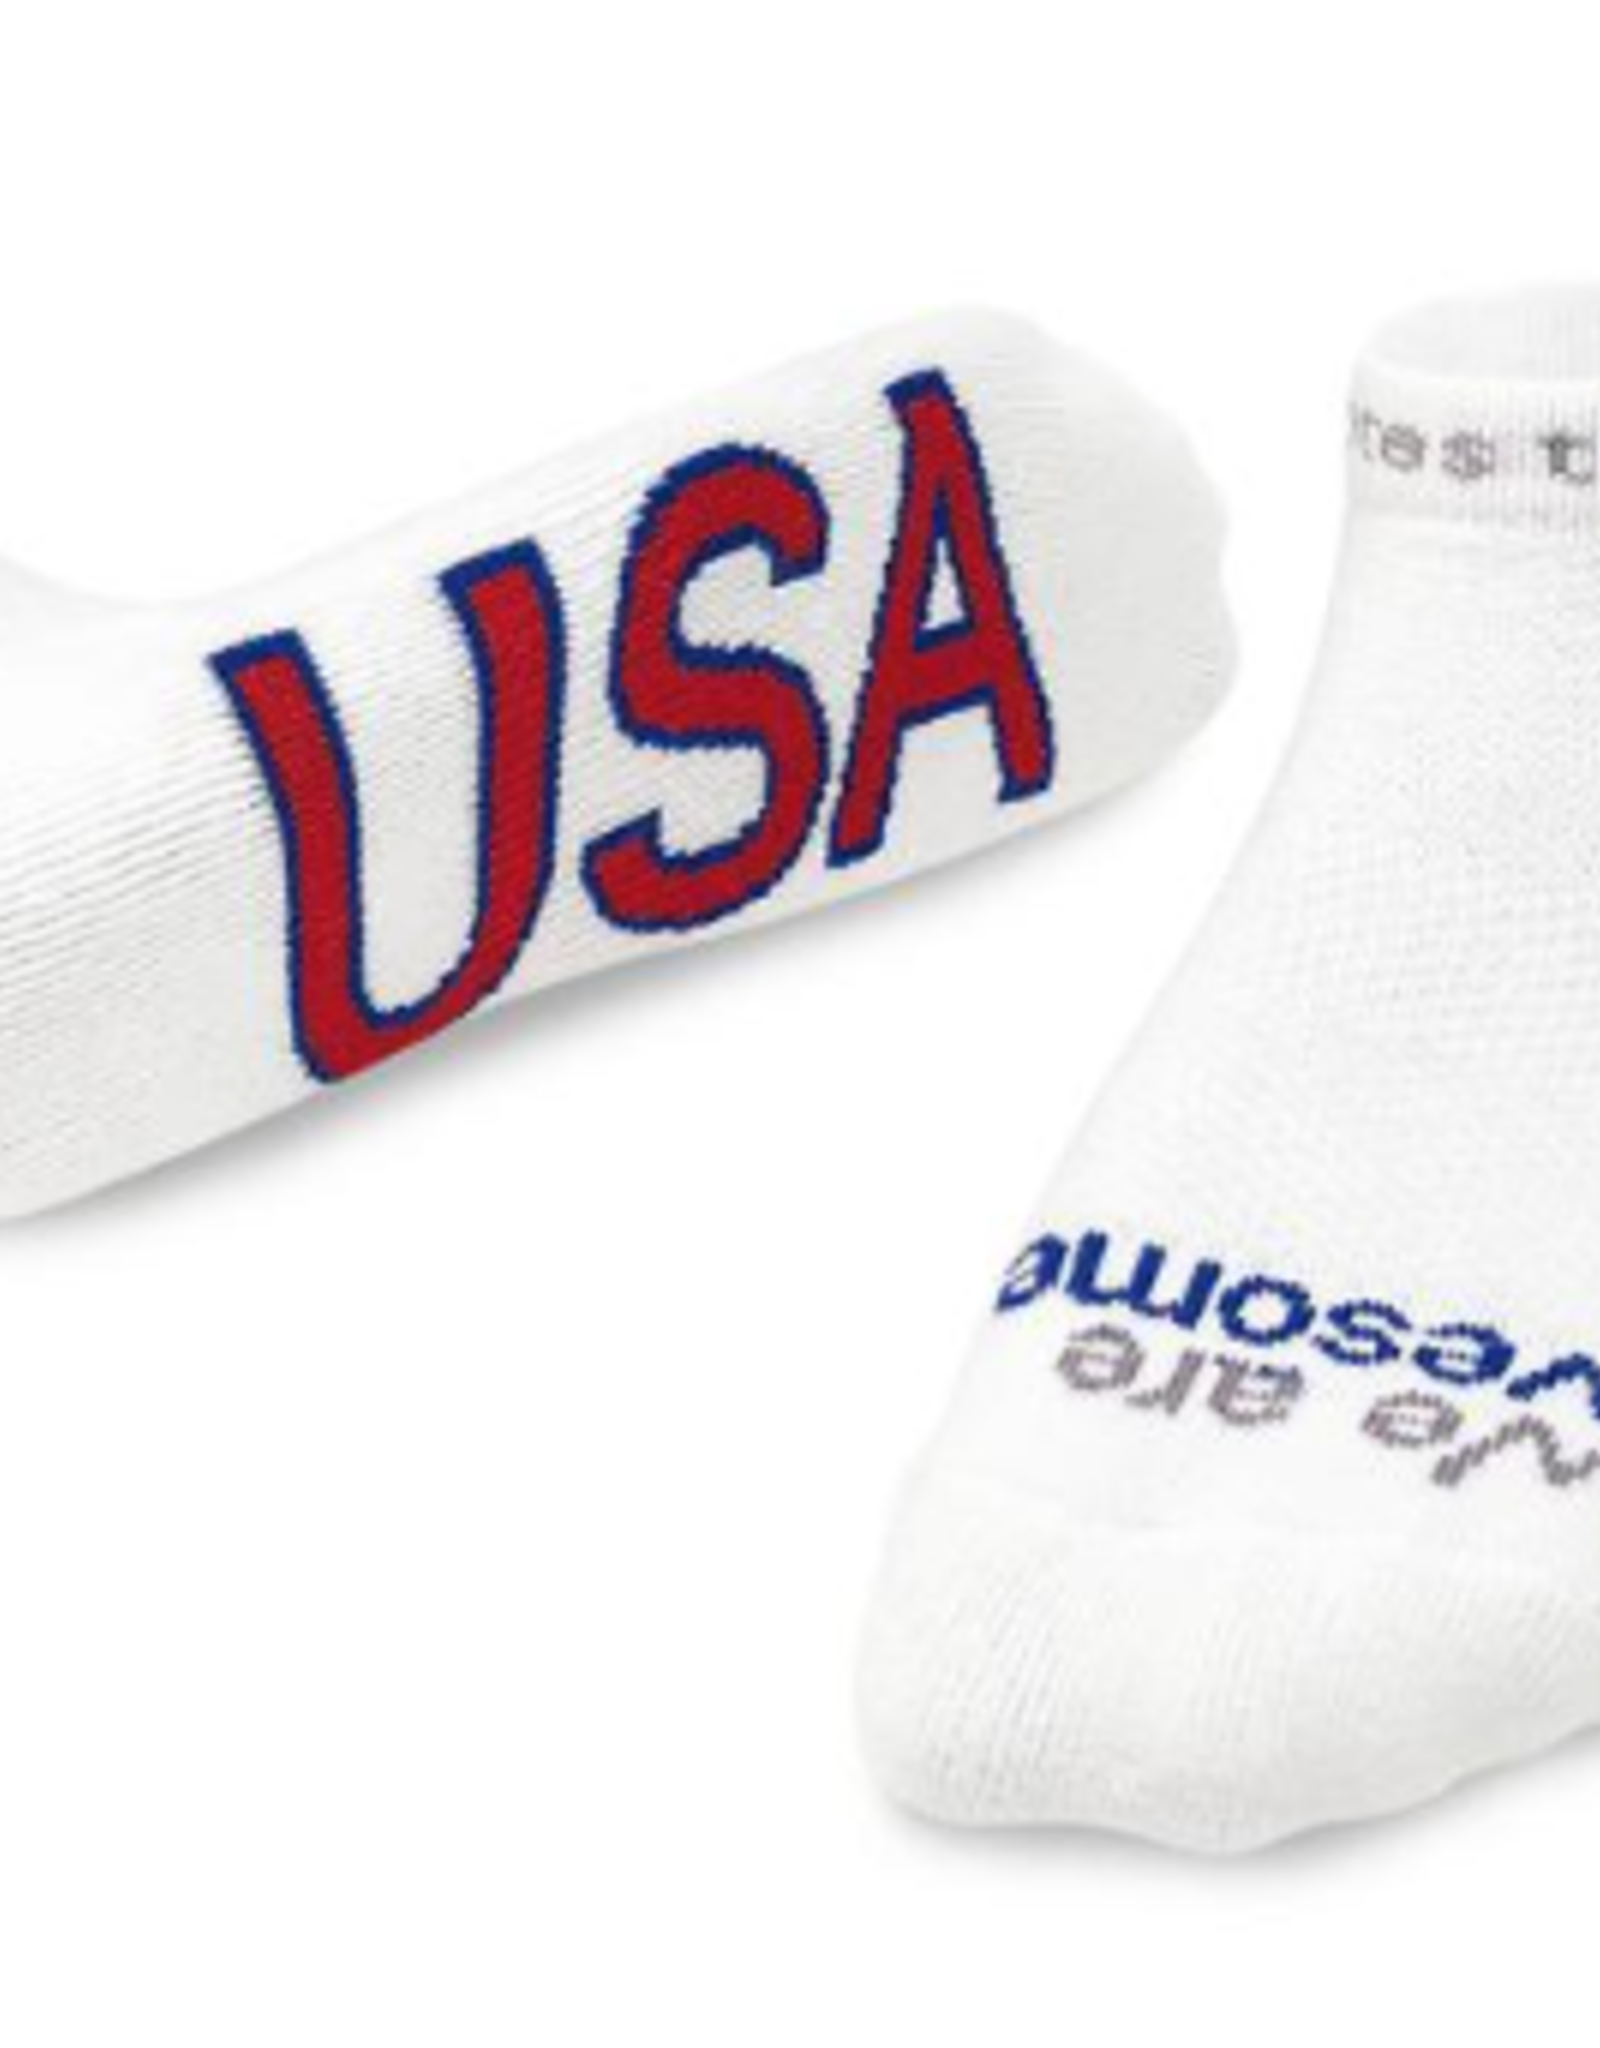 Apparel Notes to Self: We are Awesome USA - Small